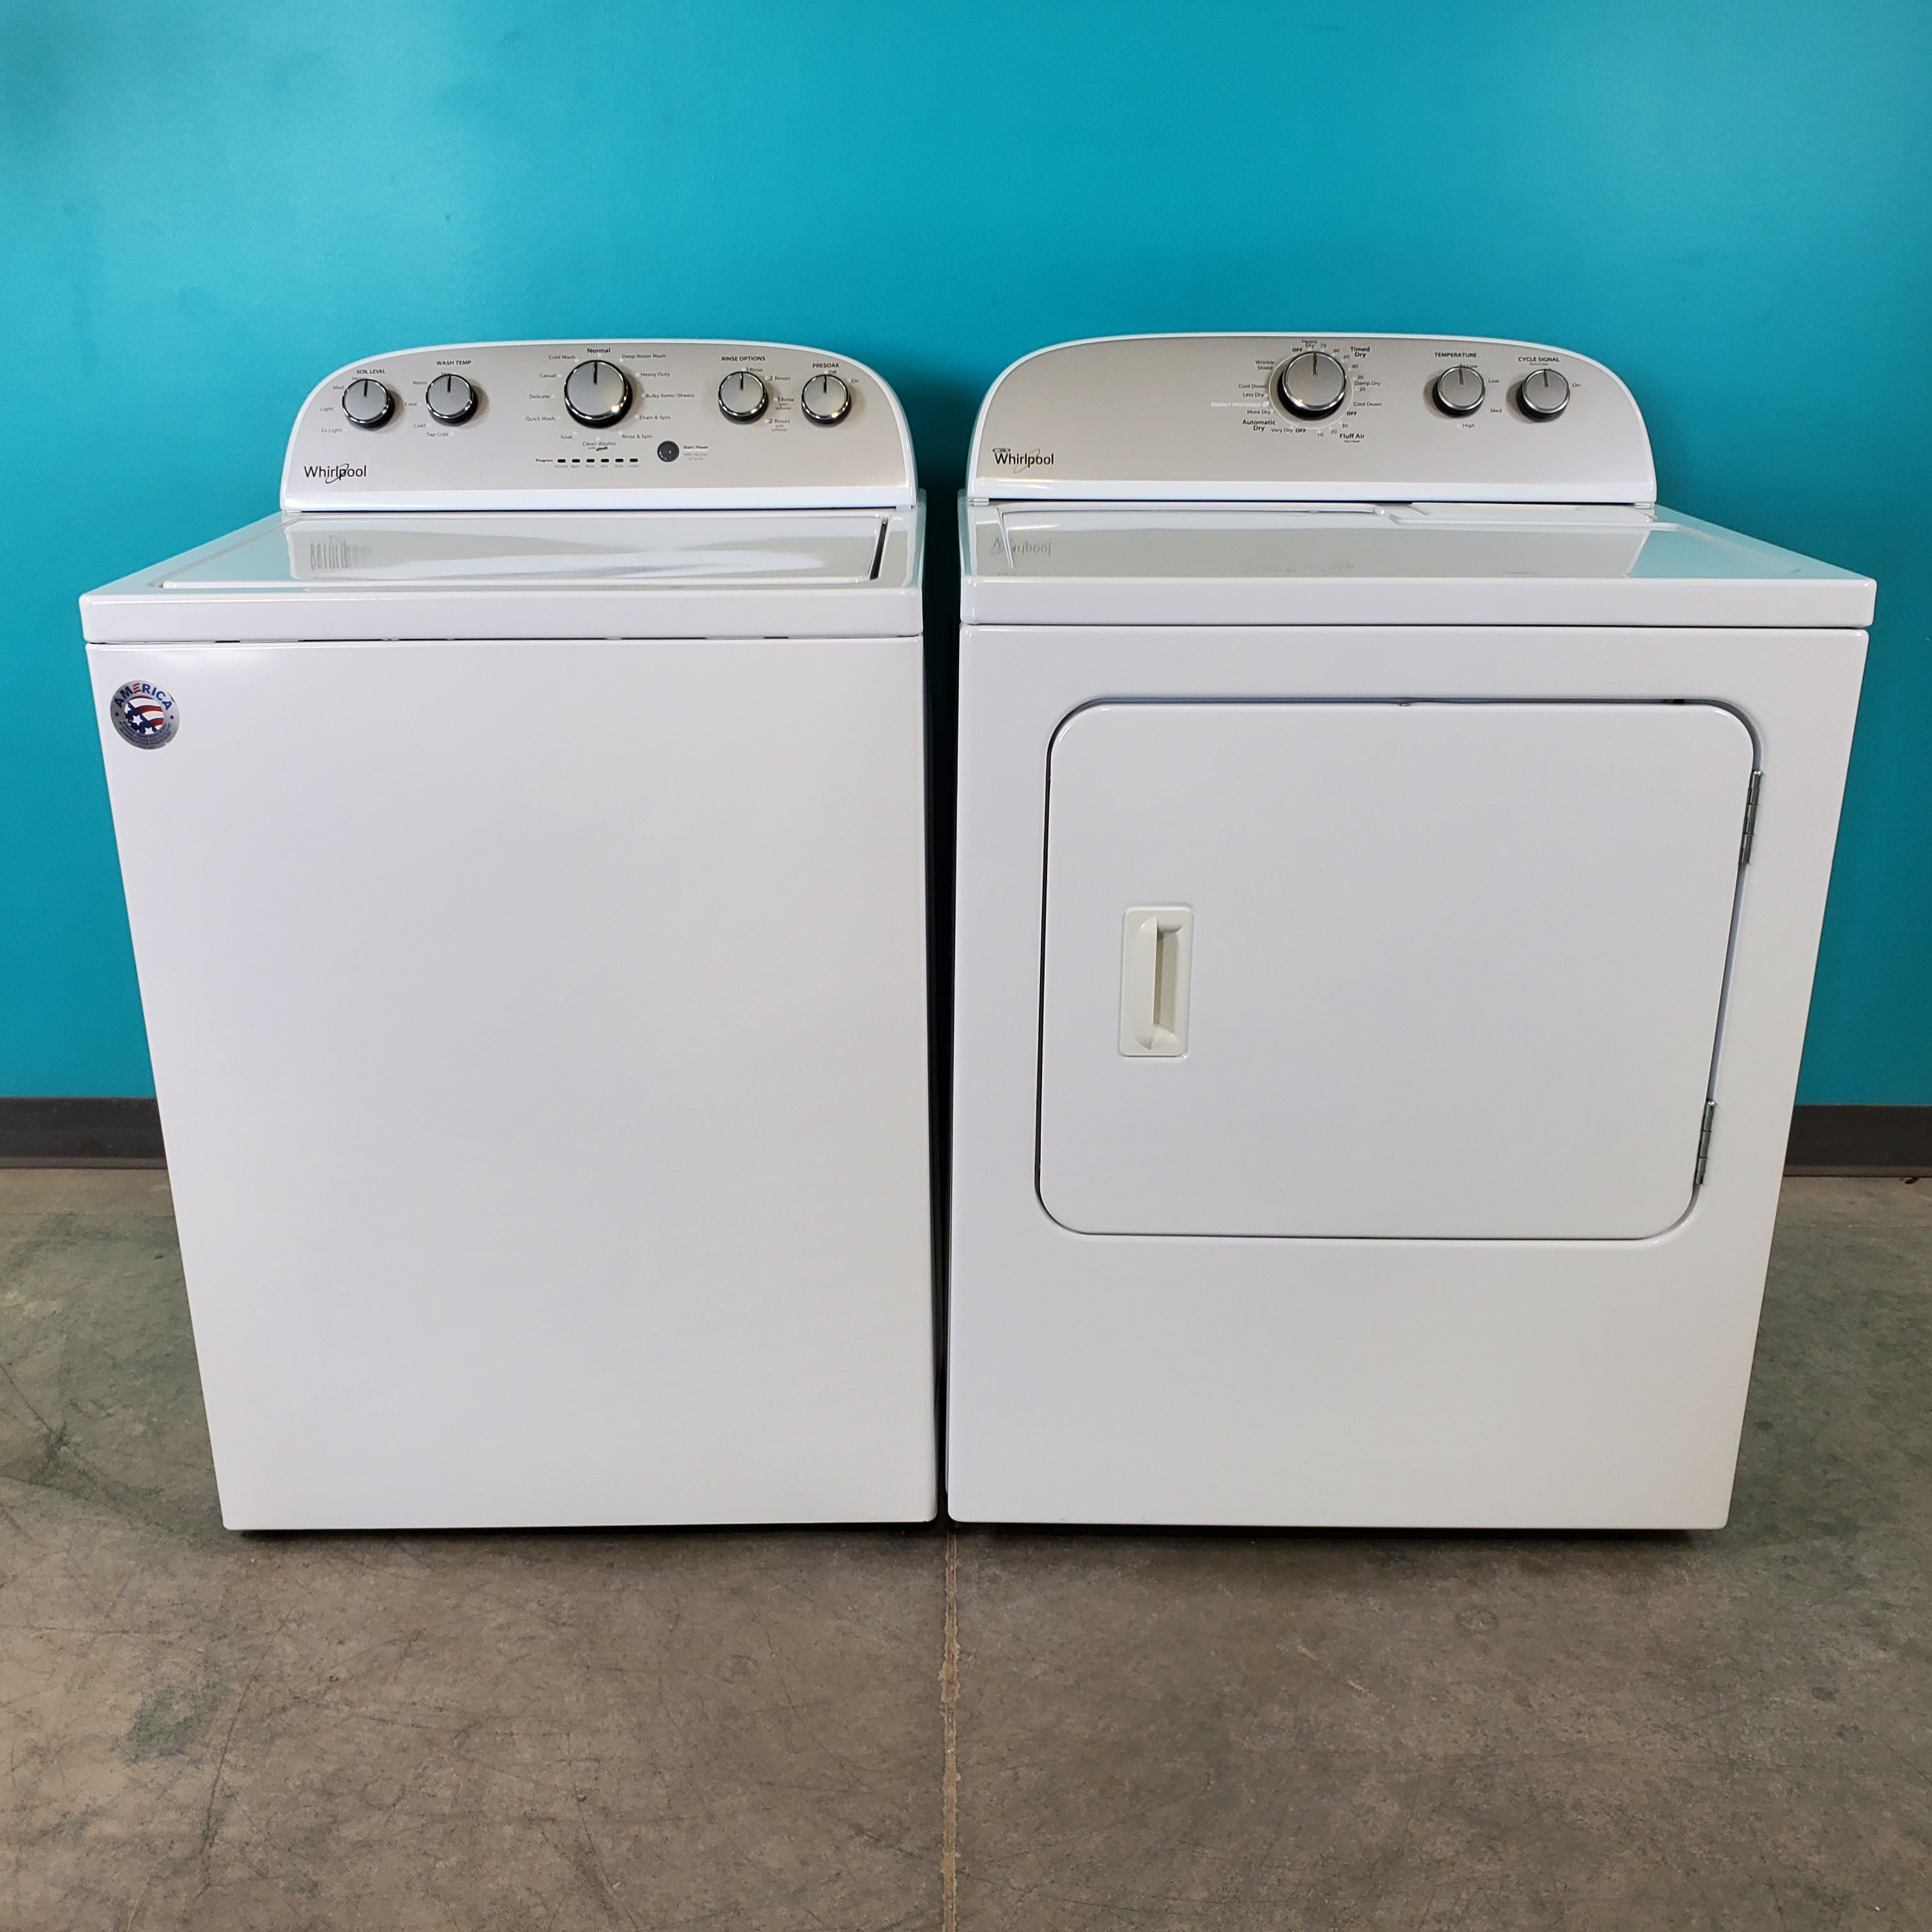 Pictures of Neu Preferred Whirlpool High Capacity Impeller Washer & Electric Dryer Set: 3.8 cu. ft. High Capacity Impeller Washer With Extra Water Cycle / Option & 7.0 cu. ft. Electric 220v Dryer With Auto Sensor Dry  - Certified Refurbished - Neu Appliance Outlet - Discount Appliance Outlet in Austin, Tx